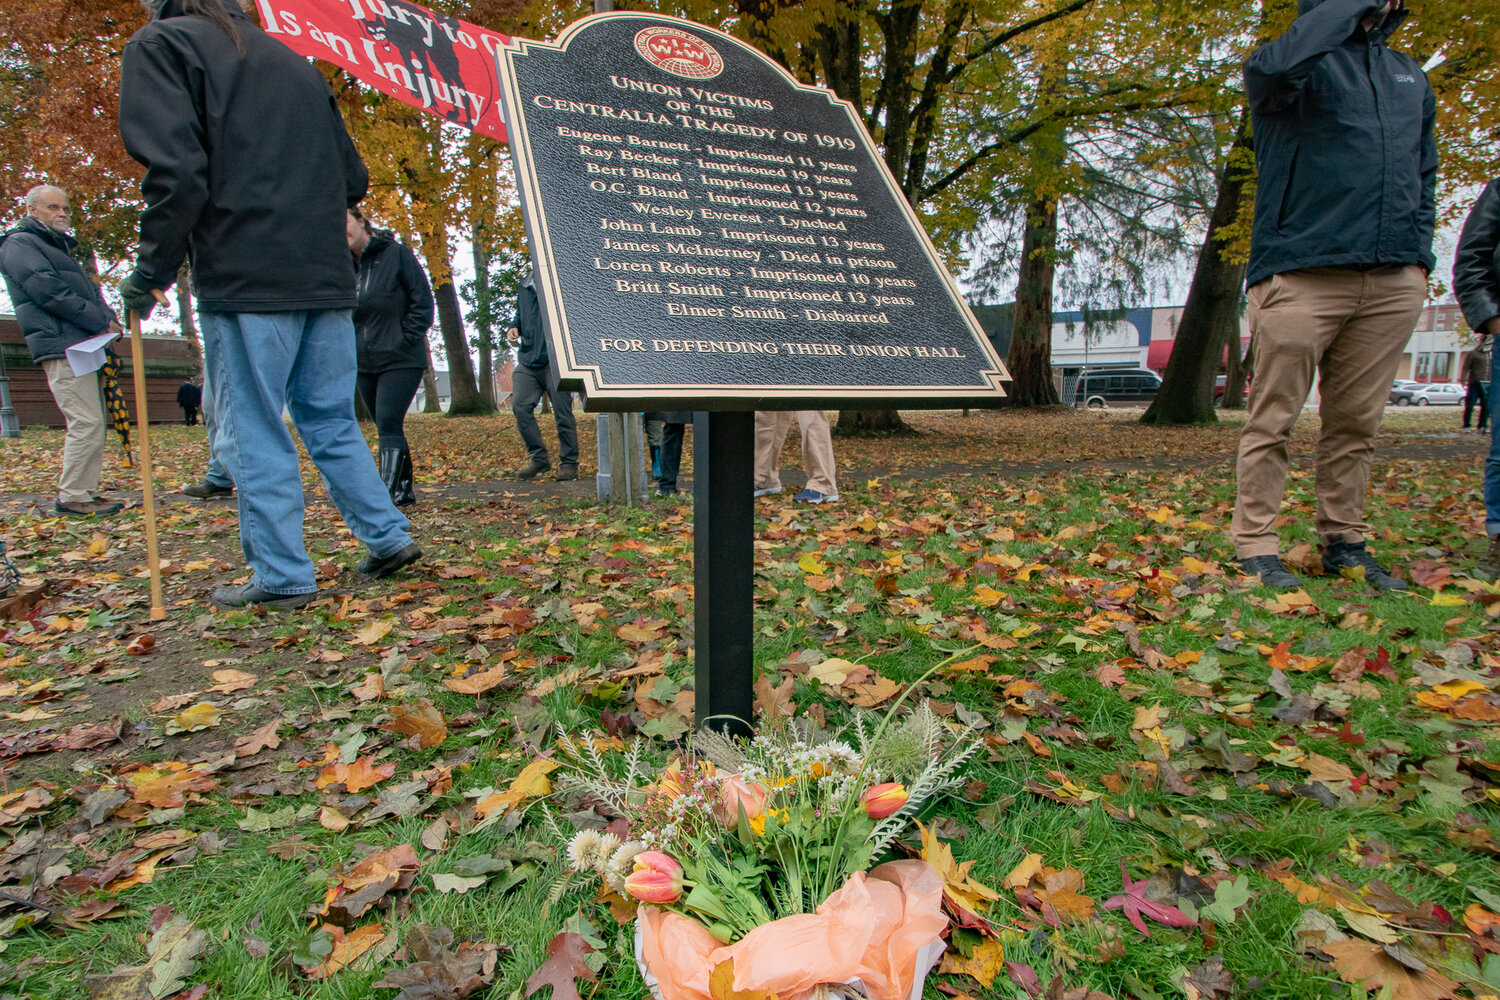 The names of Eugene Barnett, Ray Becker, Bert Bland, Ora Commodore “O.C.” Bland, John Lamb, James McInerney, Loren Roberts, Britt Smith, Elmer Smith and Westley Everest are seen on Saturday, Nov. 11, on a new plaque dedicated to them in Centralia's George Washington Park.